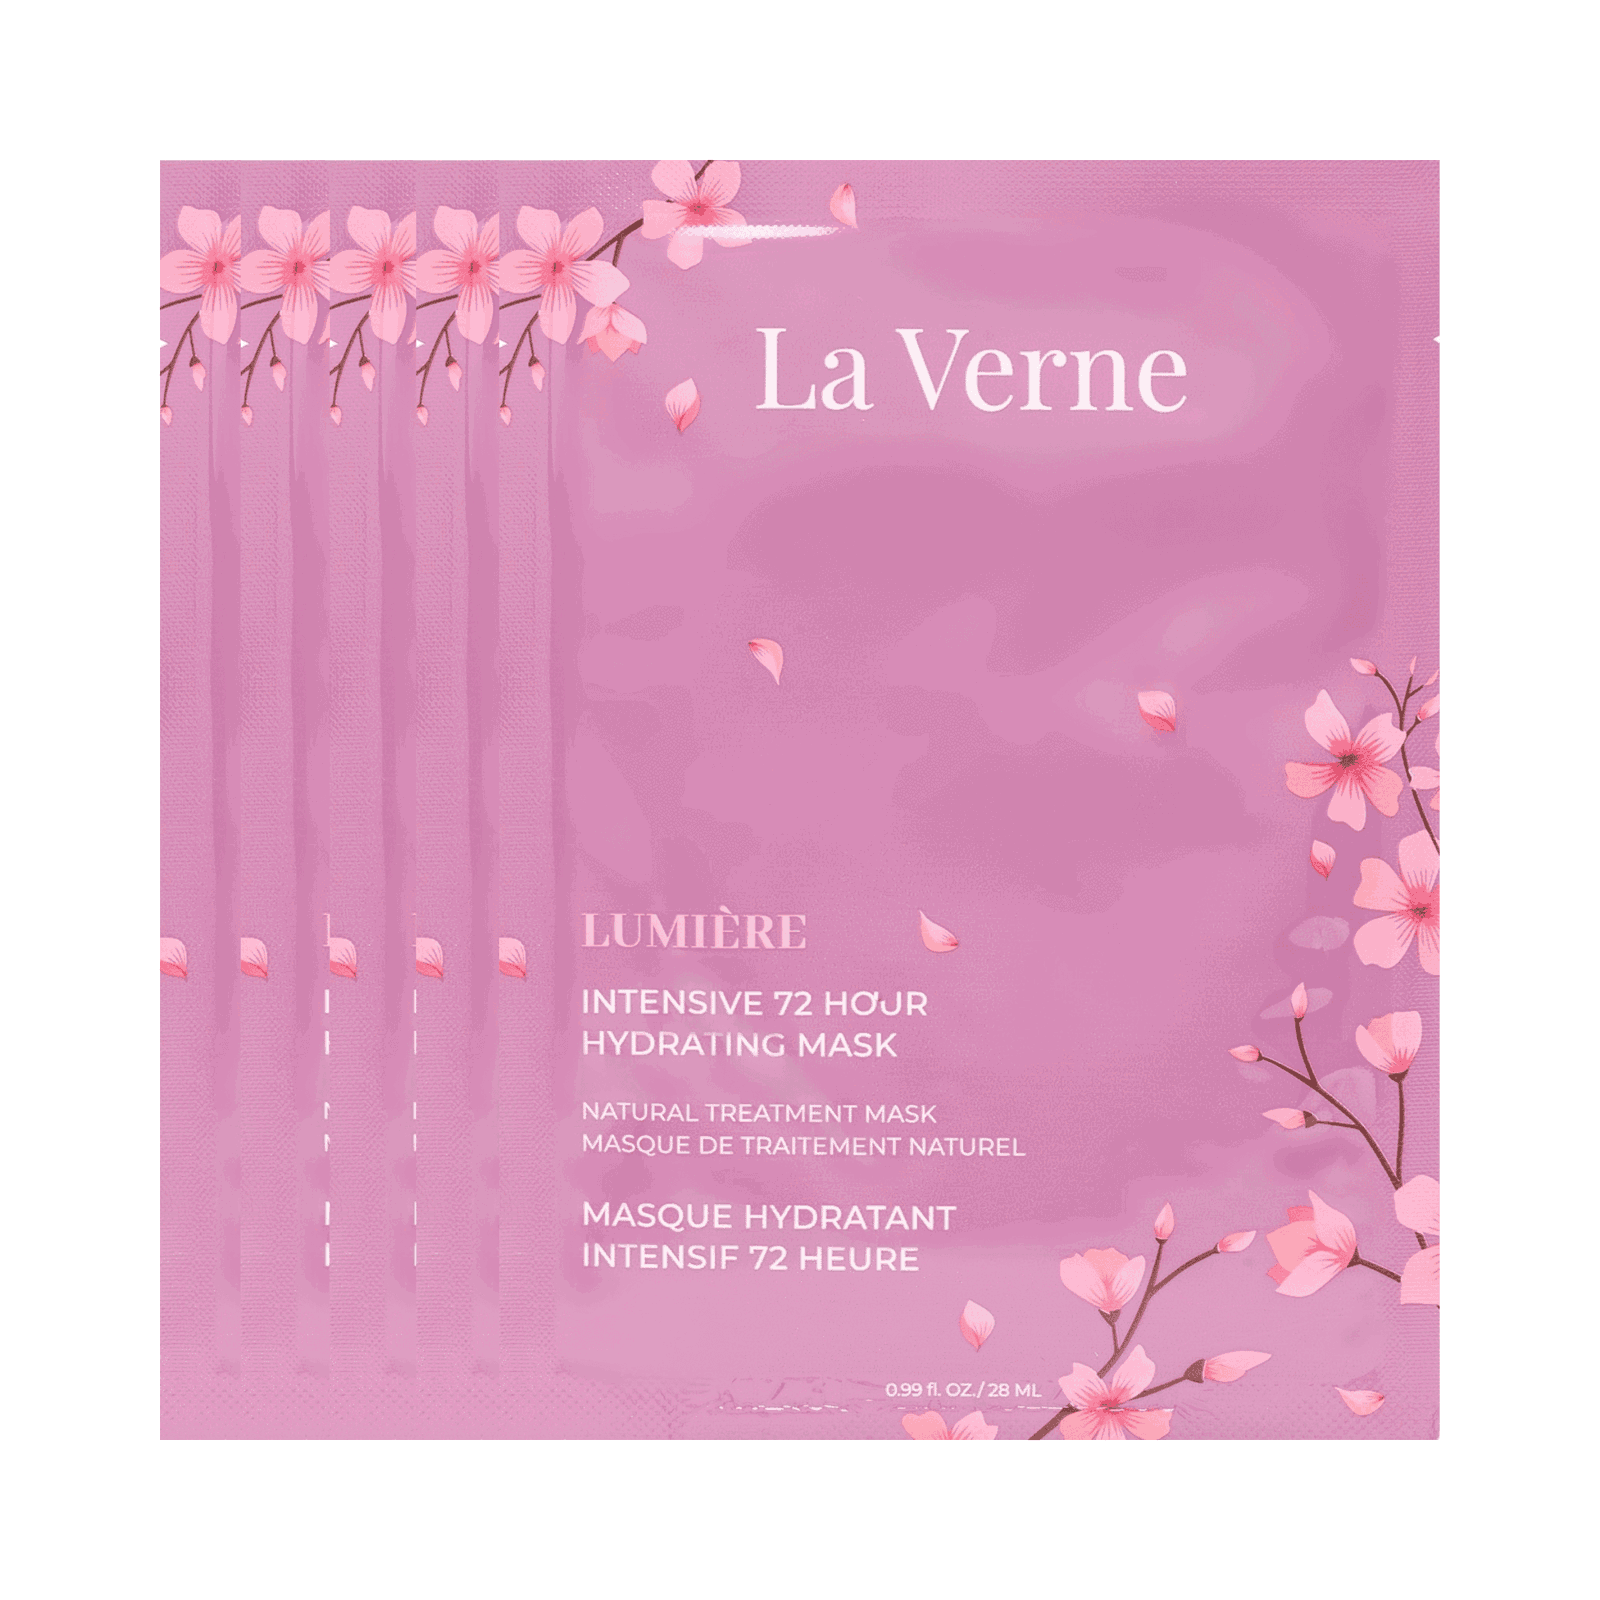 La Verne Lumiere Intensive 72 Hour Hydrating Mask - Miessential